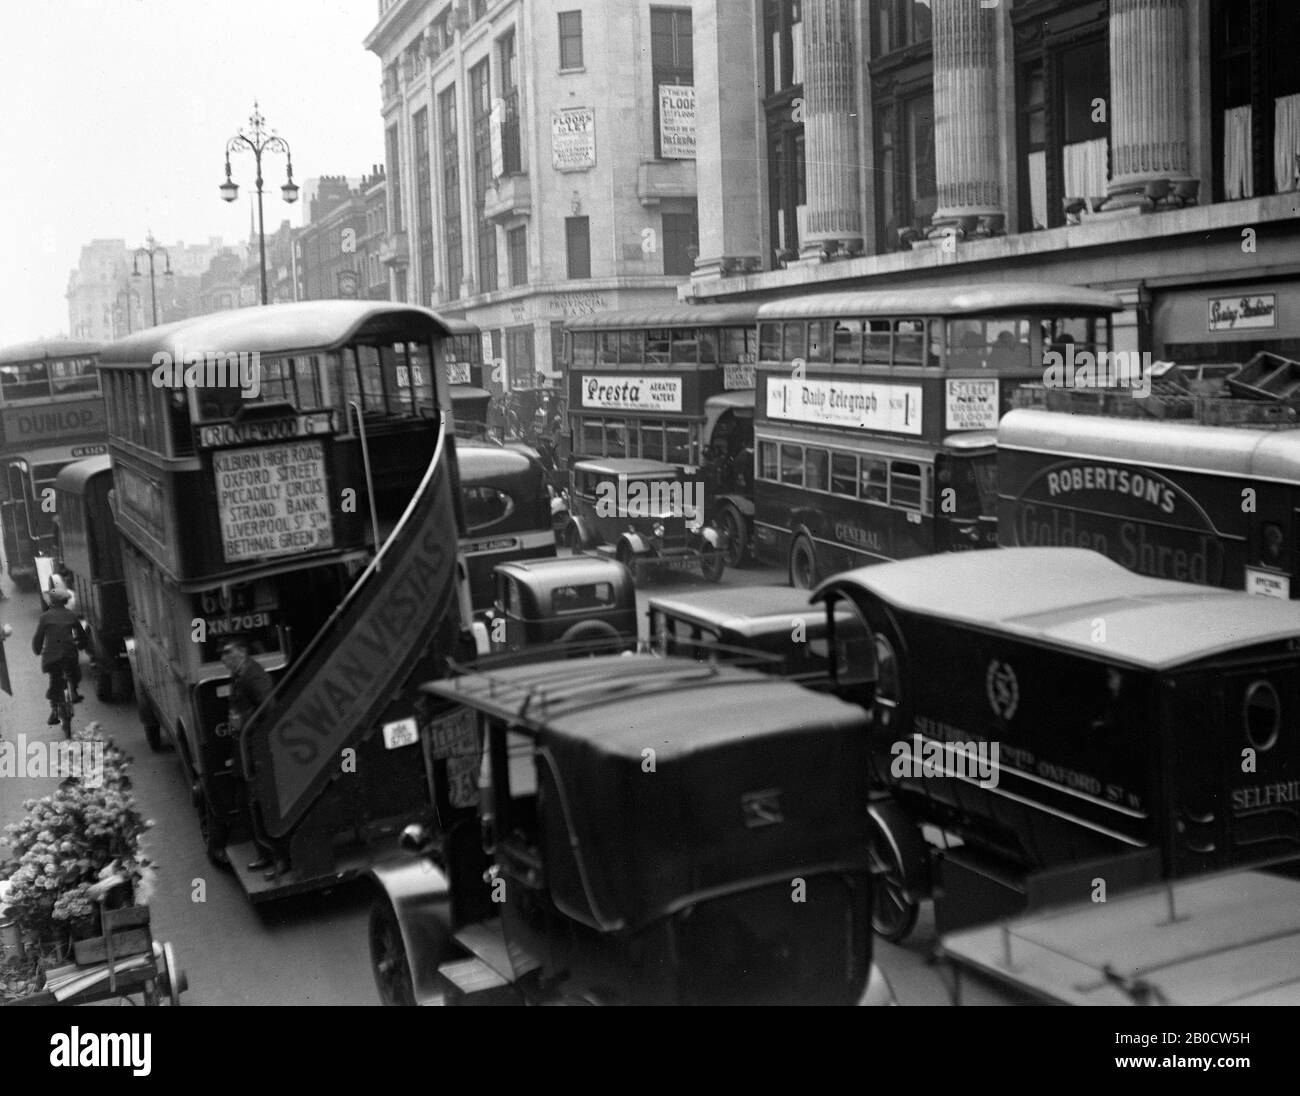 Traffic in Oxford Street, London. Selfridge's is on the right. Stock Photo